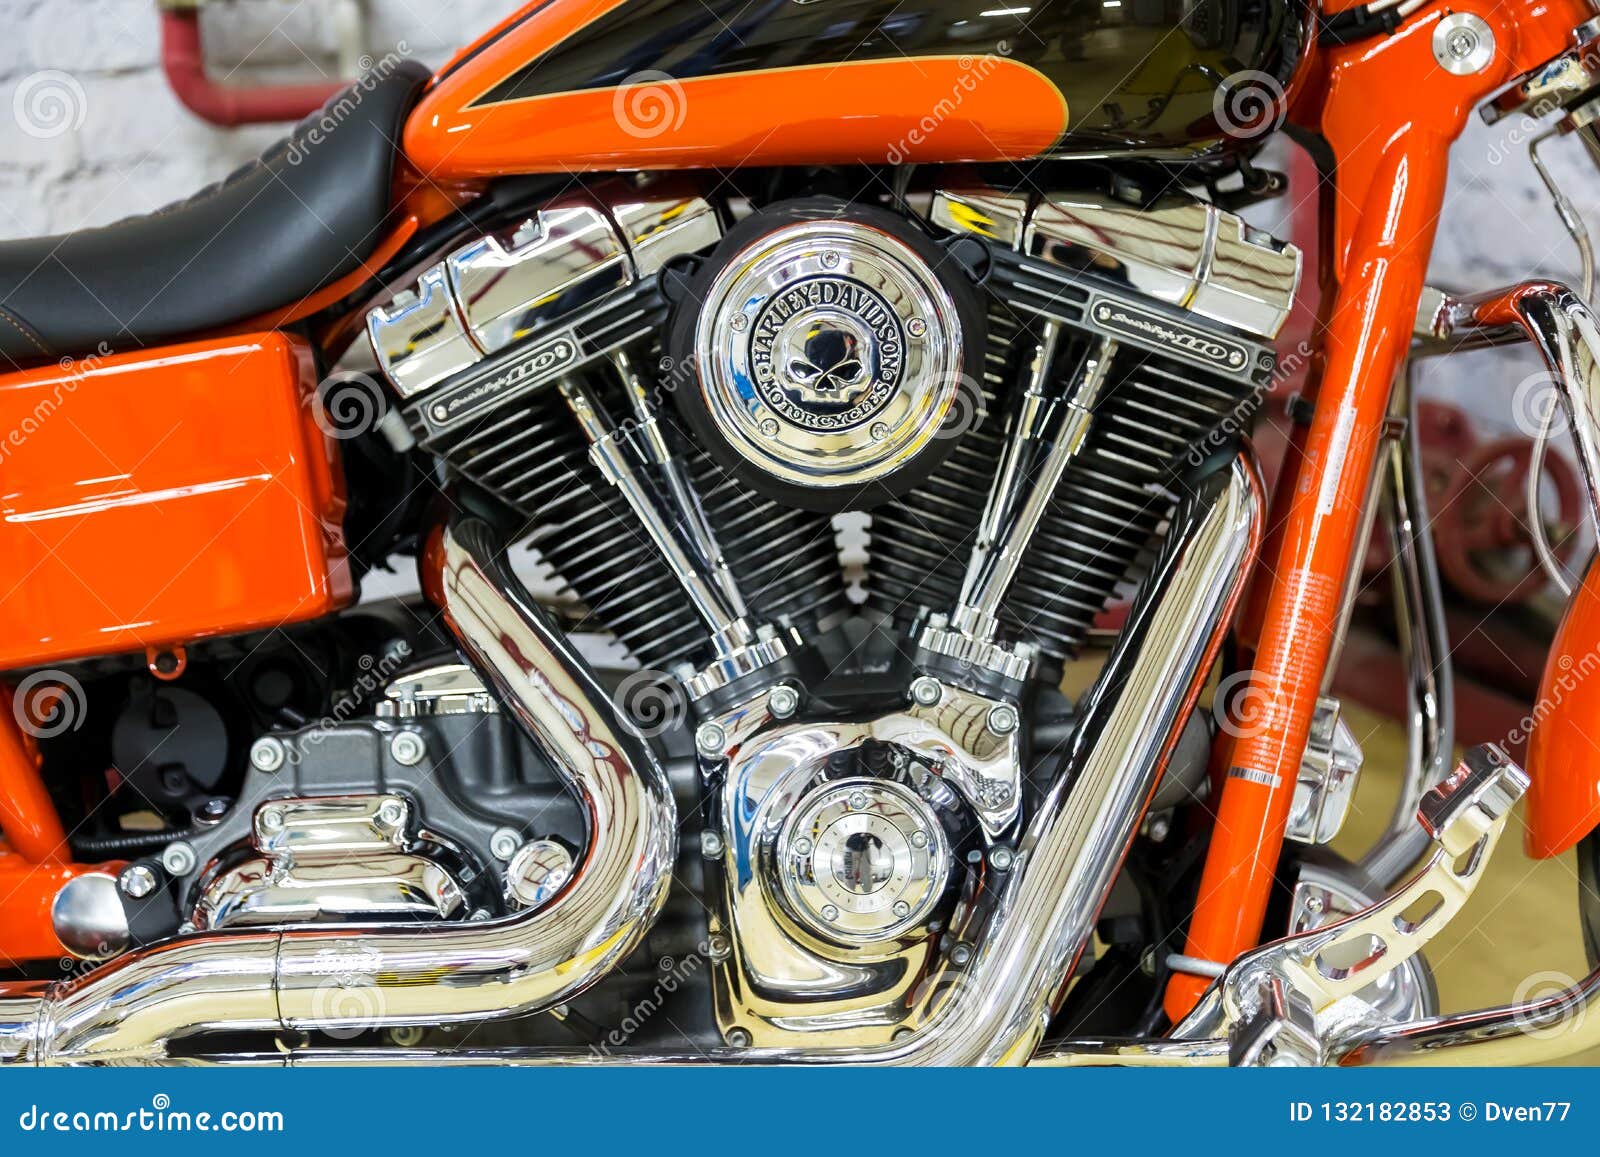 Moscow November 2018 Orange Harley Davidson Stands In The Garage Twin Cam Screamin Eagle 110 Engine Editorial Stock Photo Image Of Color Open 132182853